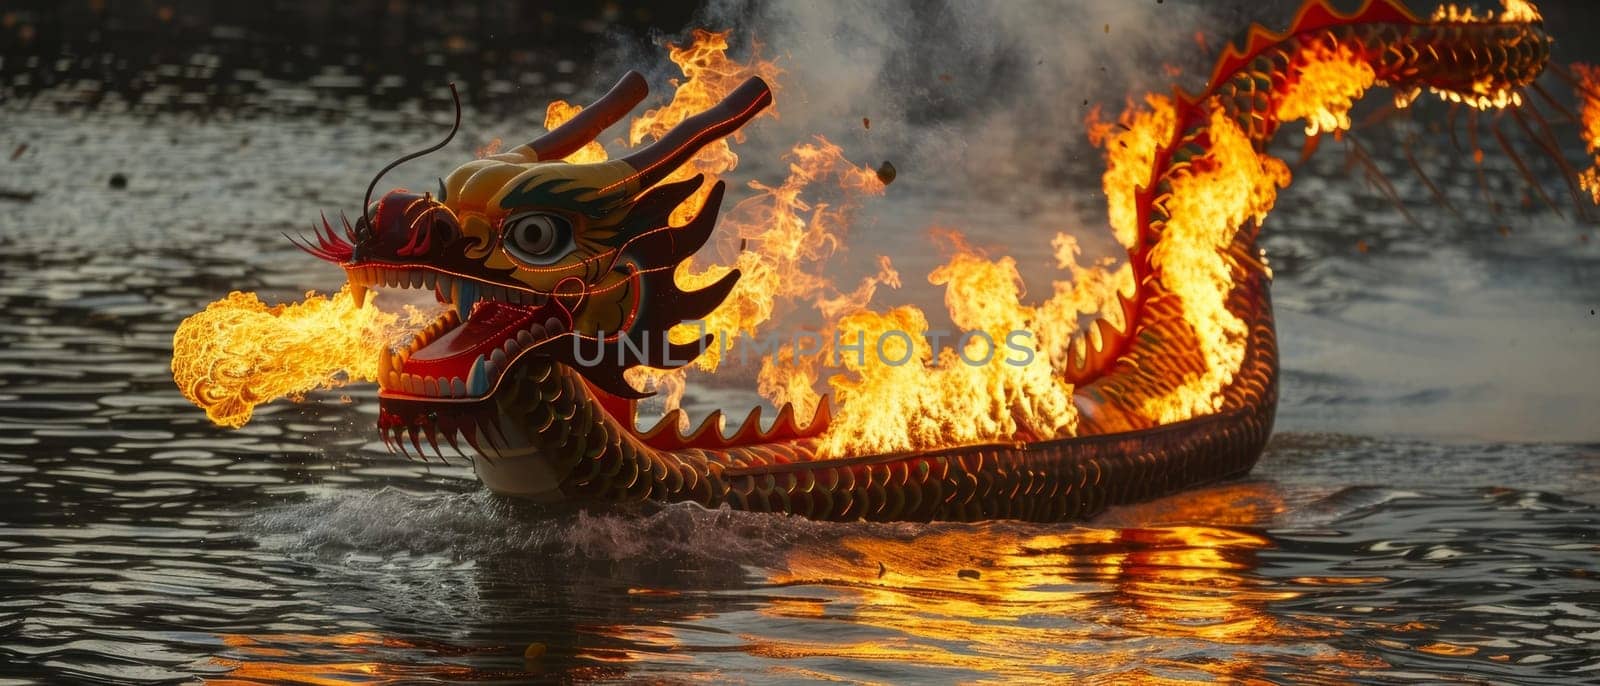 A striking image of a dragon boat on water, with the dragons head spewing flames, reflecting the vibrancy and excitement of dragon boat festivals. by sfinks